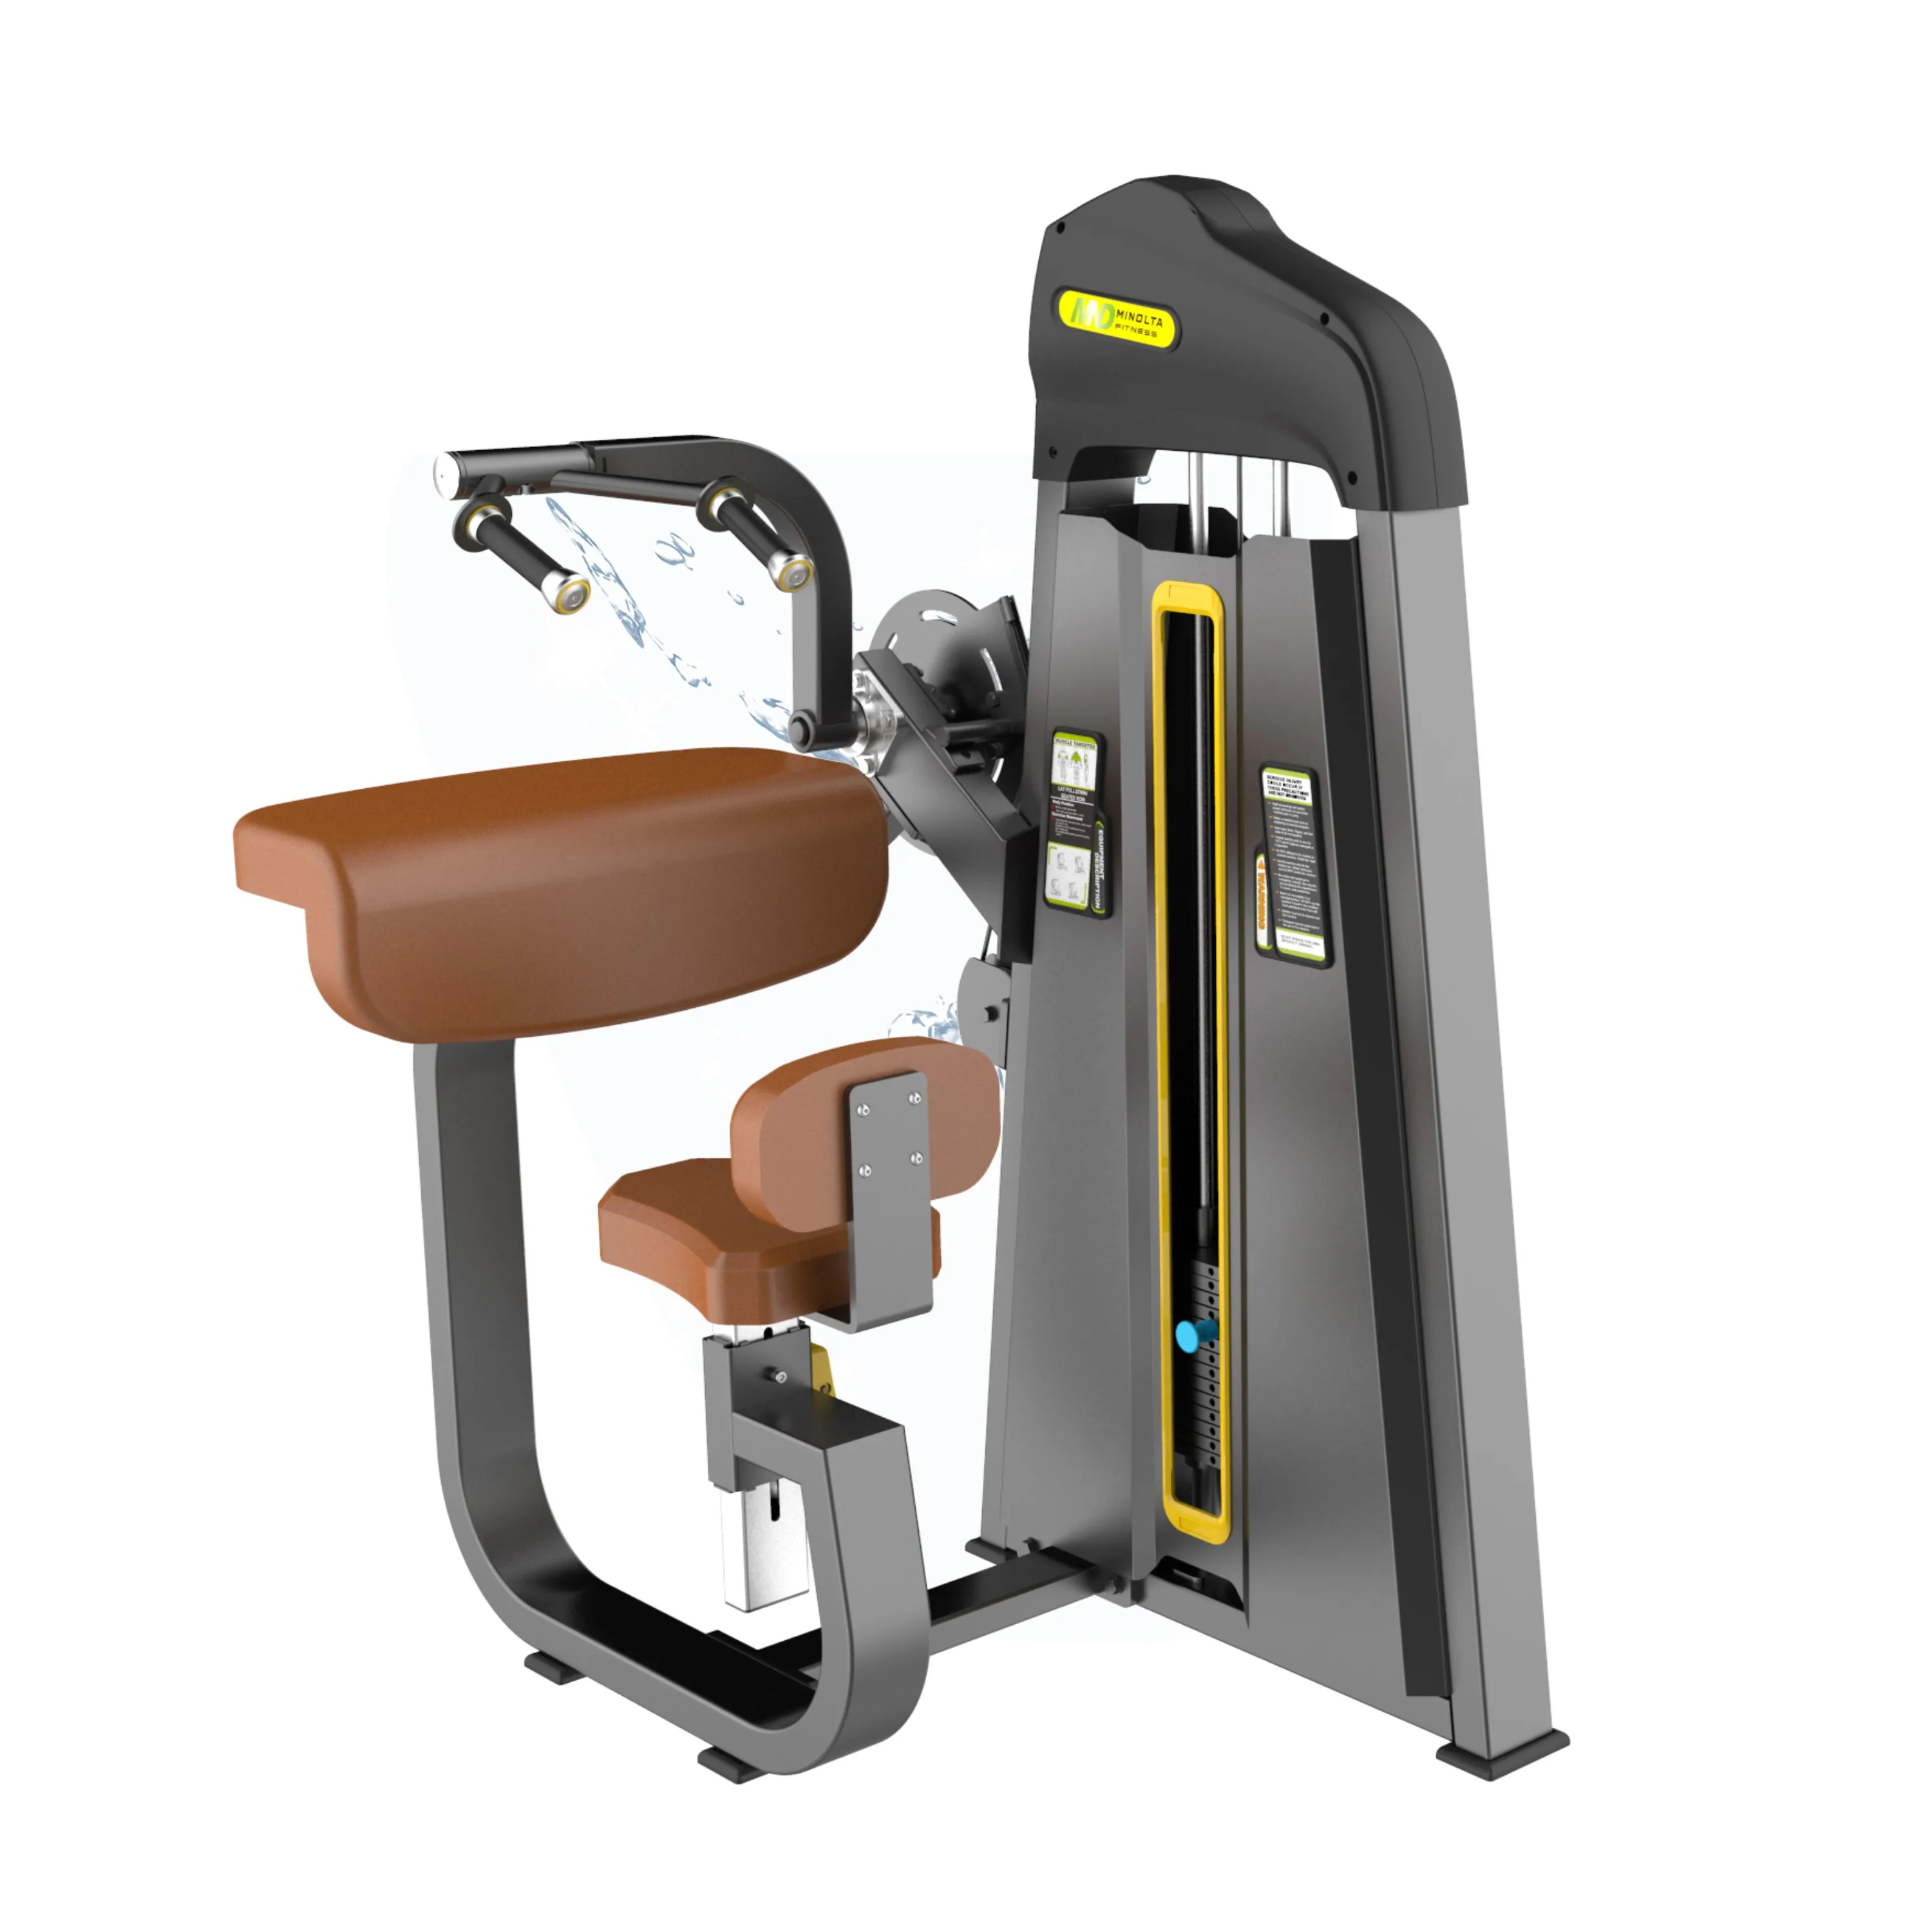 

On Sale Discount Seated Triceps-Flat Trainer Fitness Equipment Manufacturer Triceps Workout Machine with good quality, Customized color